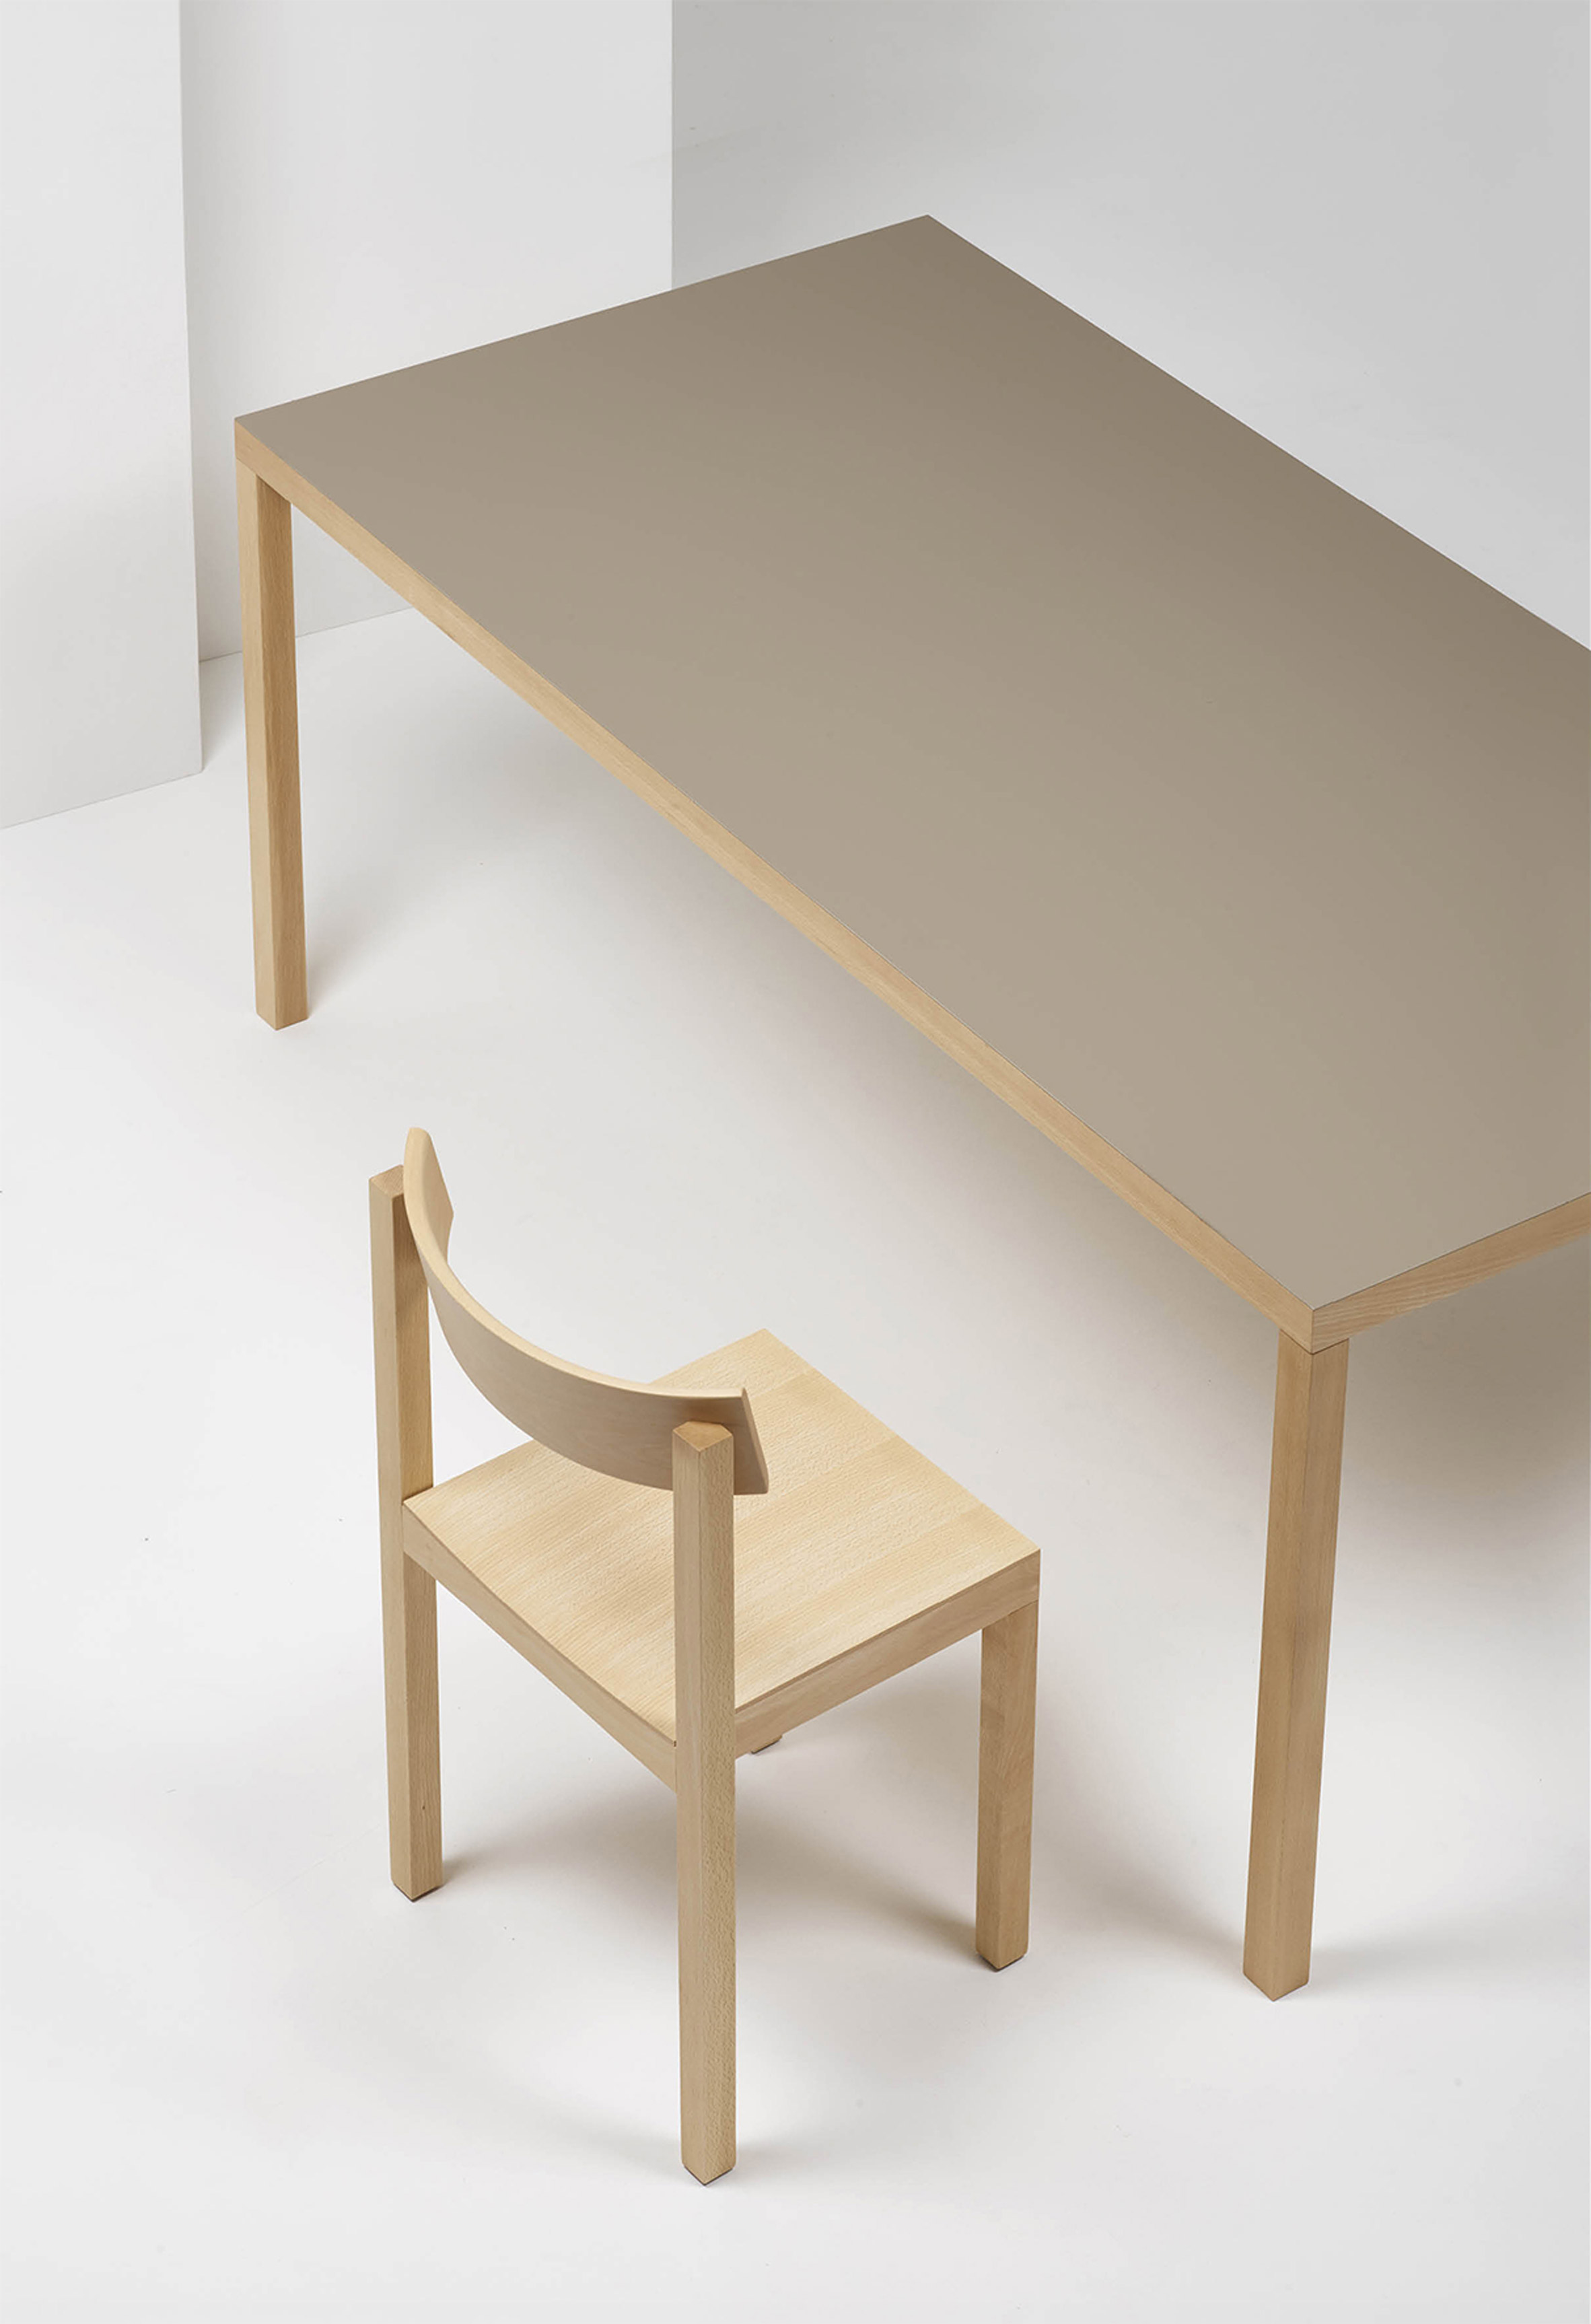 Primo by Konstantin Grcic for Mattiazzi